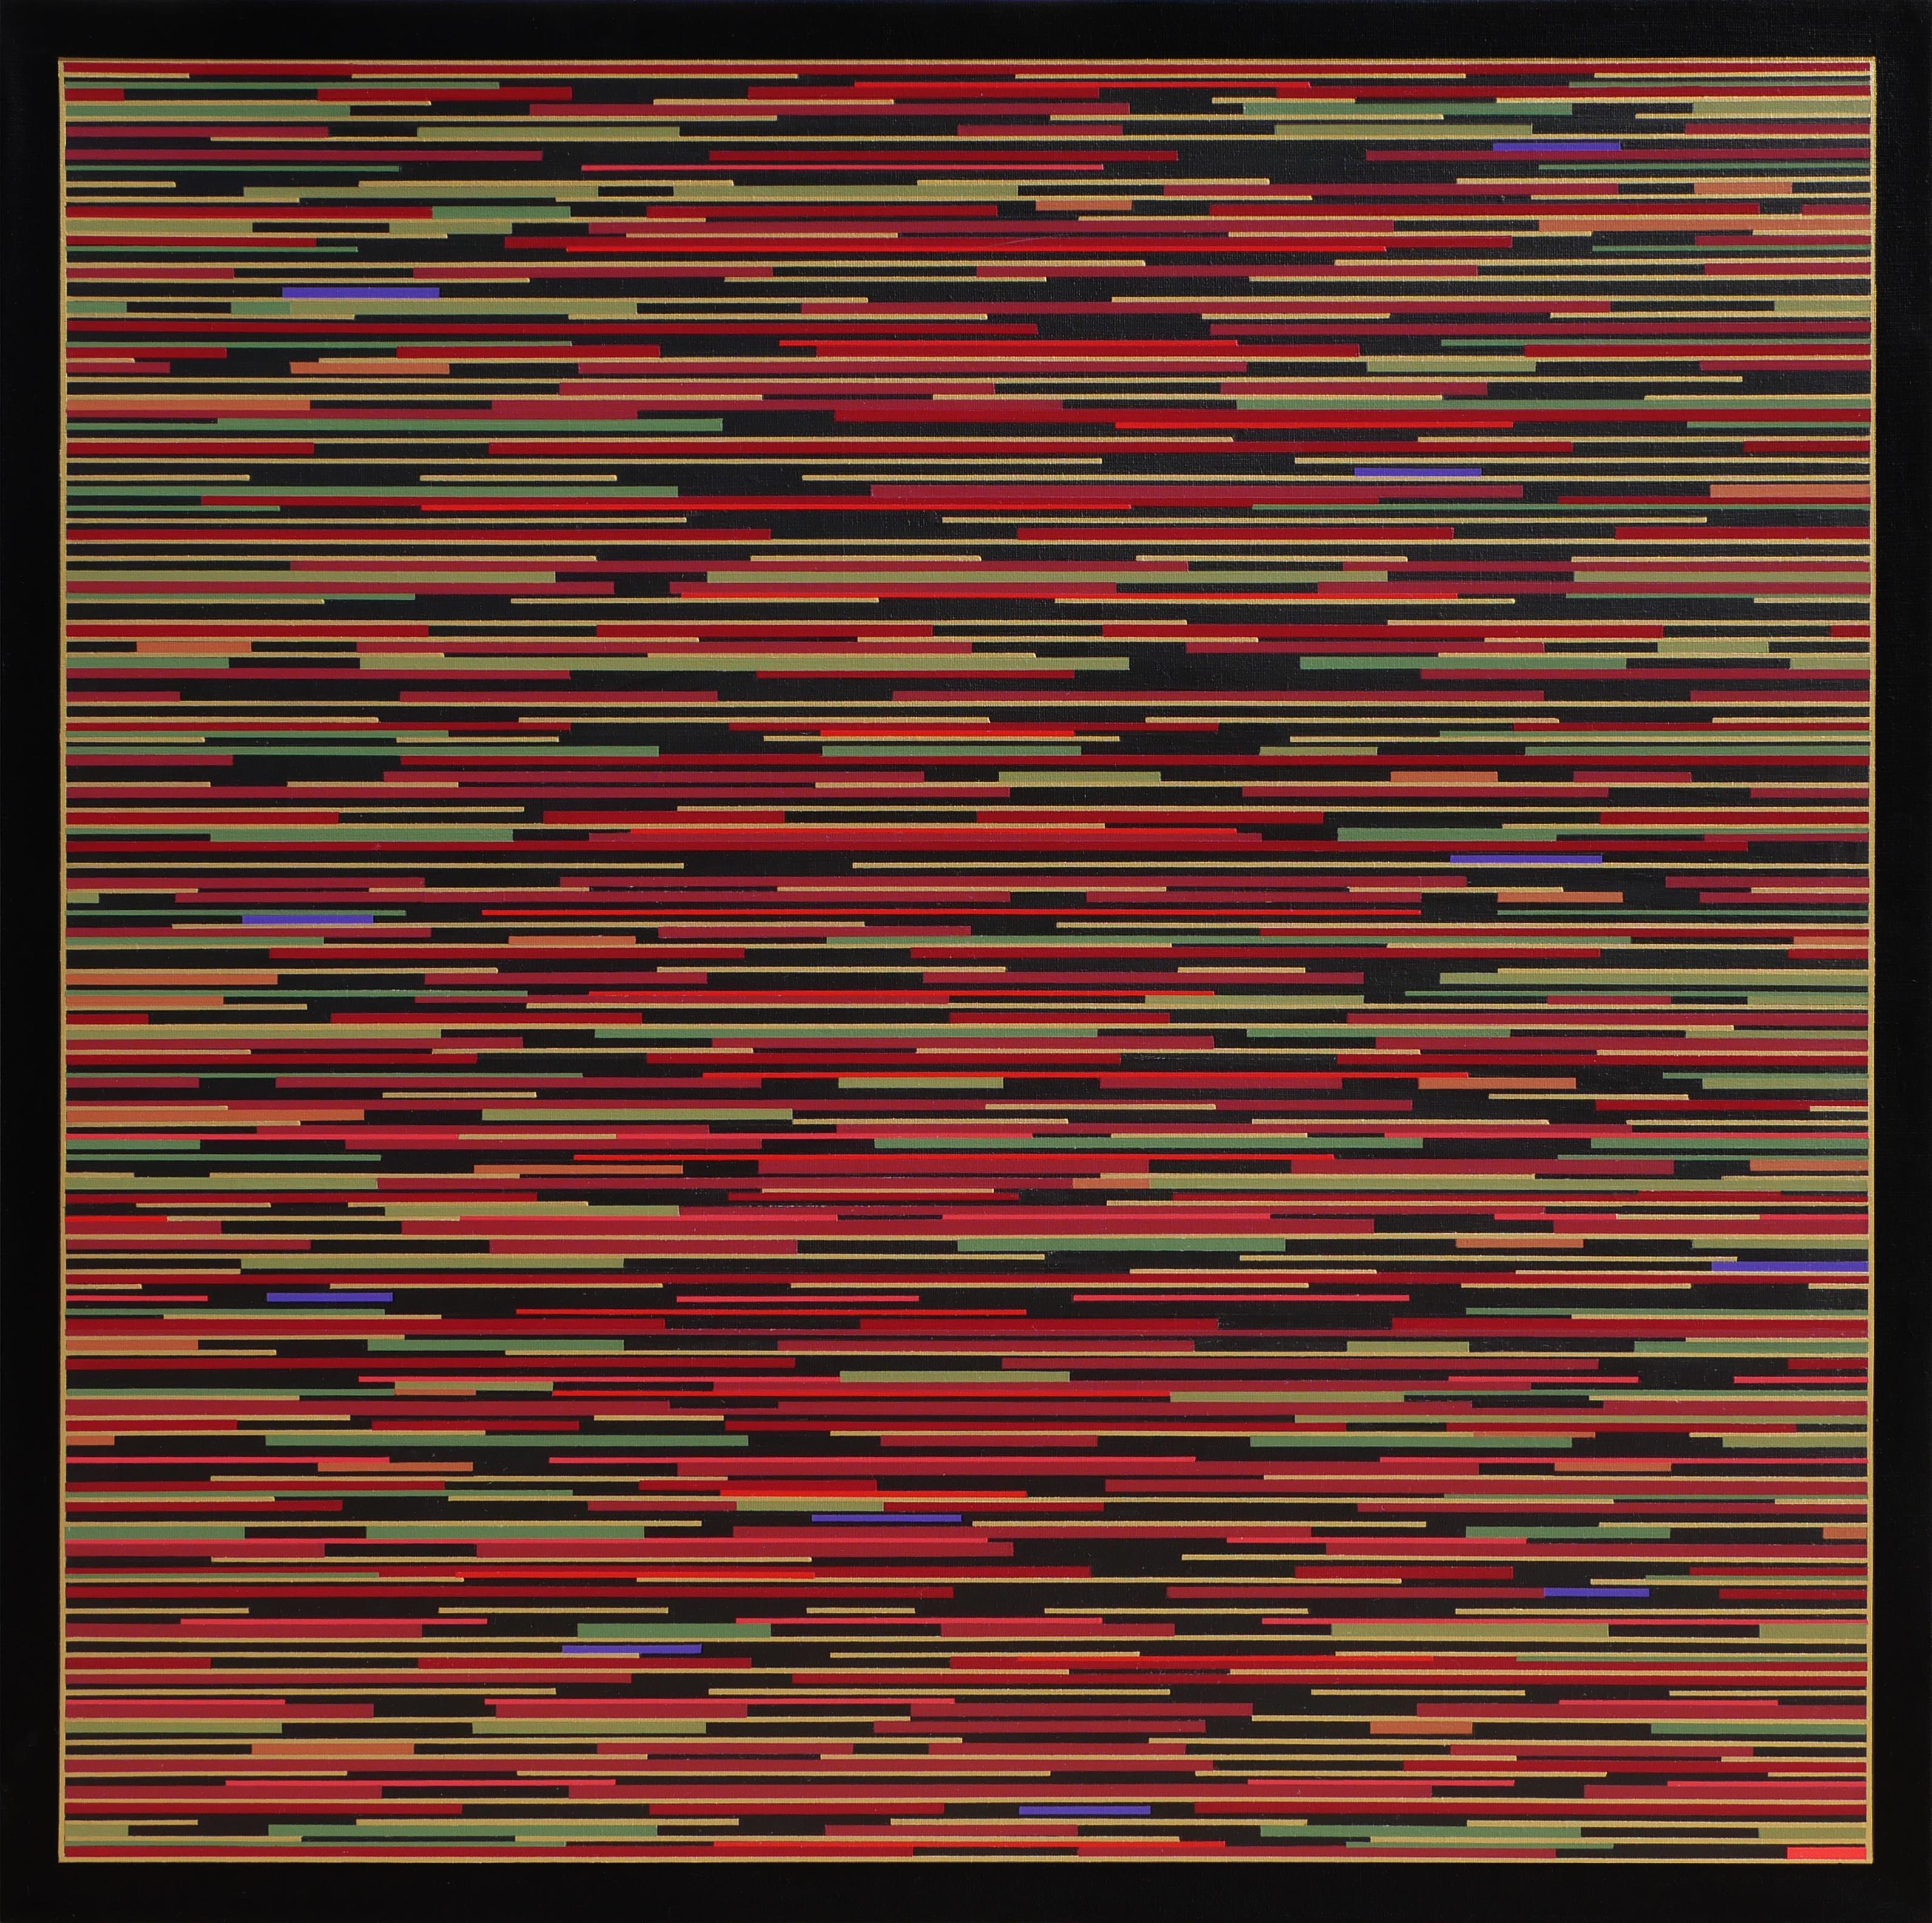 Contemporary abstract geometric painting by artist Mark Byckowski. The work is featured in a series of paintings. The work features horizontal lines with a variety of vivid colors of red, orange, green, and yellow, painted on a black background.